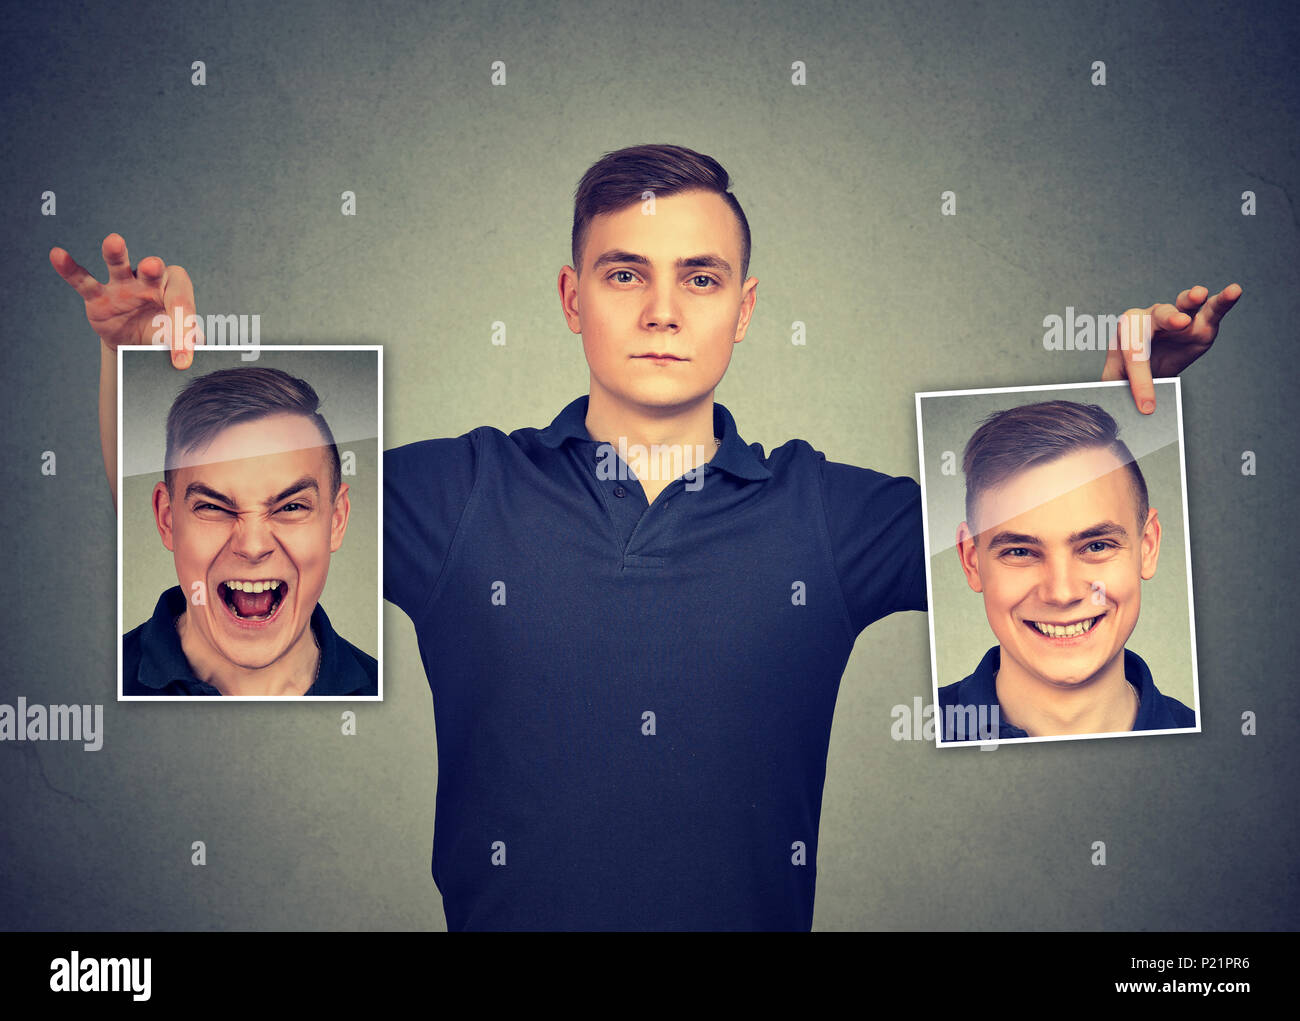 Set of Funny Portraits of Different Young People Faces Expressing Emotions.  Cartoon Style. Happy, Angry, Sad, Annoyed Stock Image - Image of human, face:  255779047